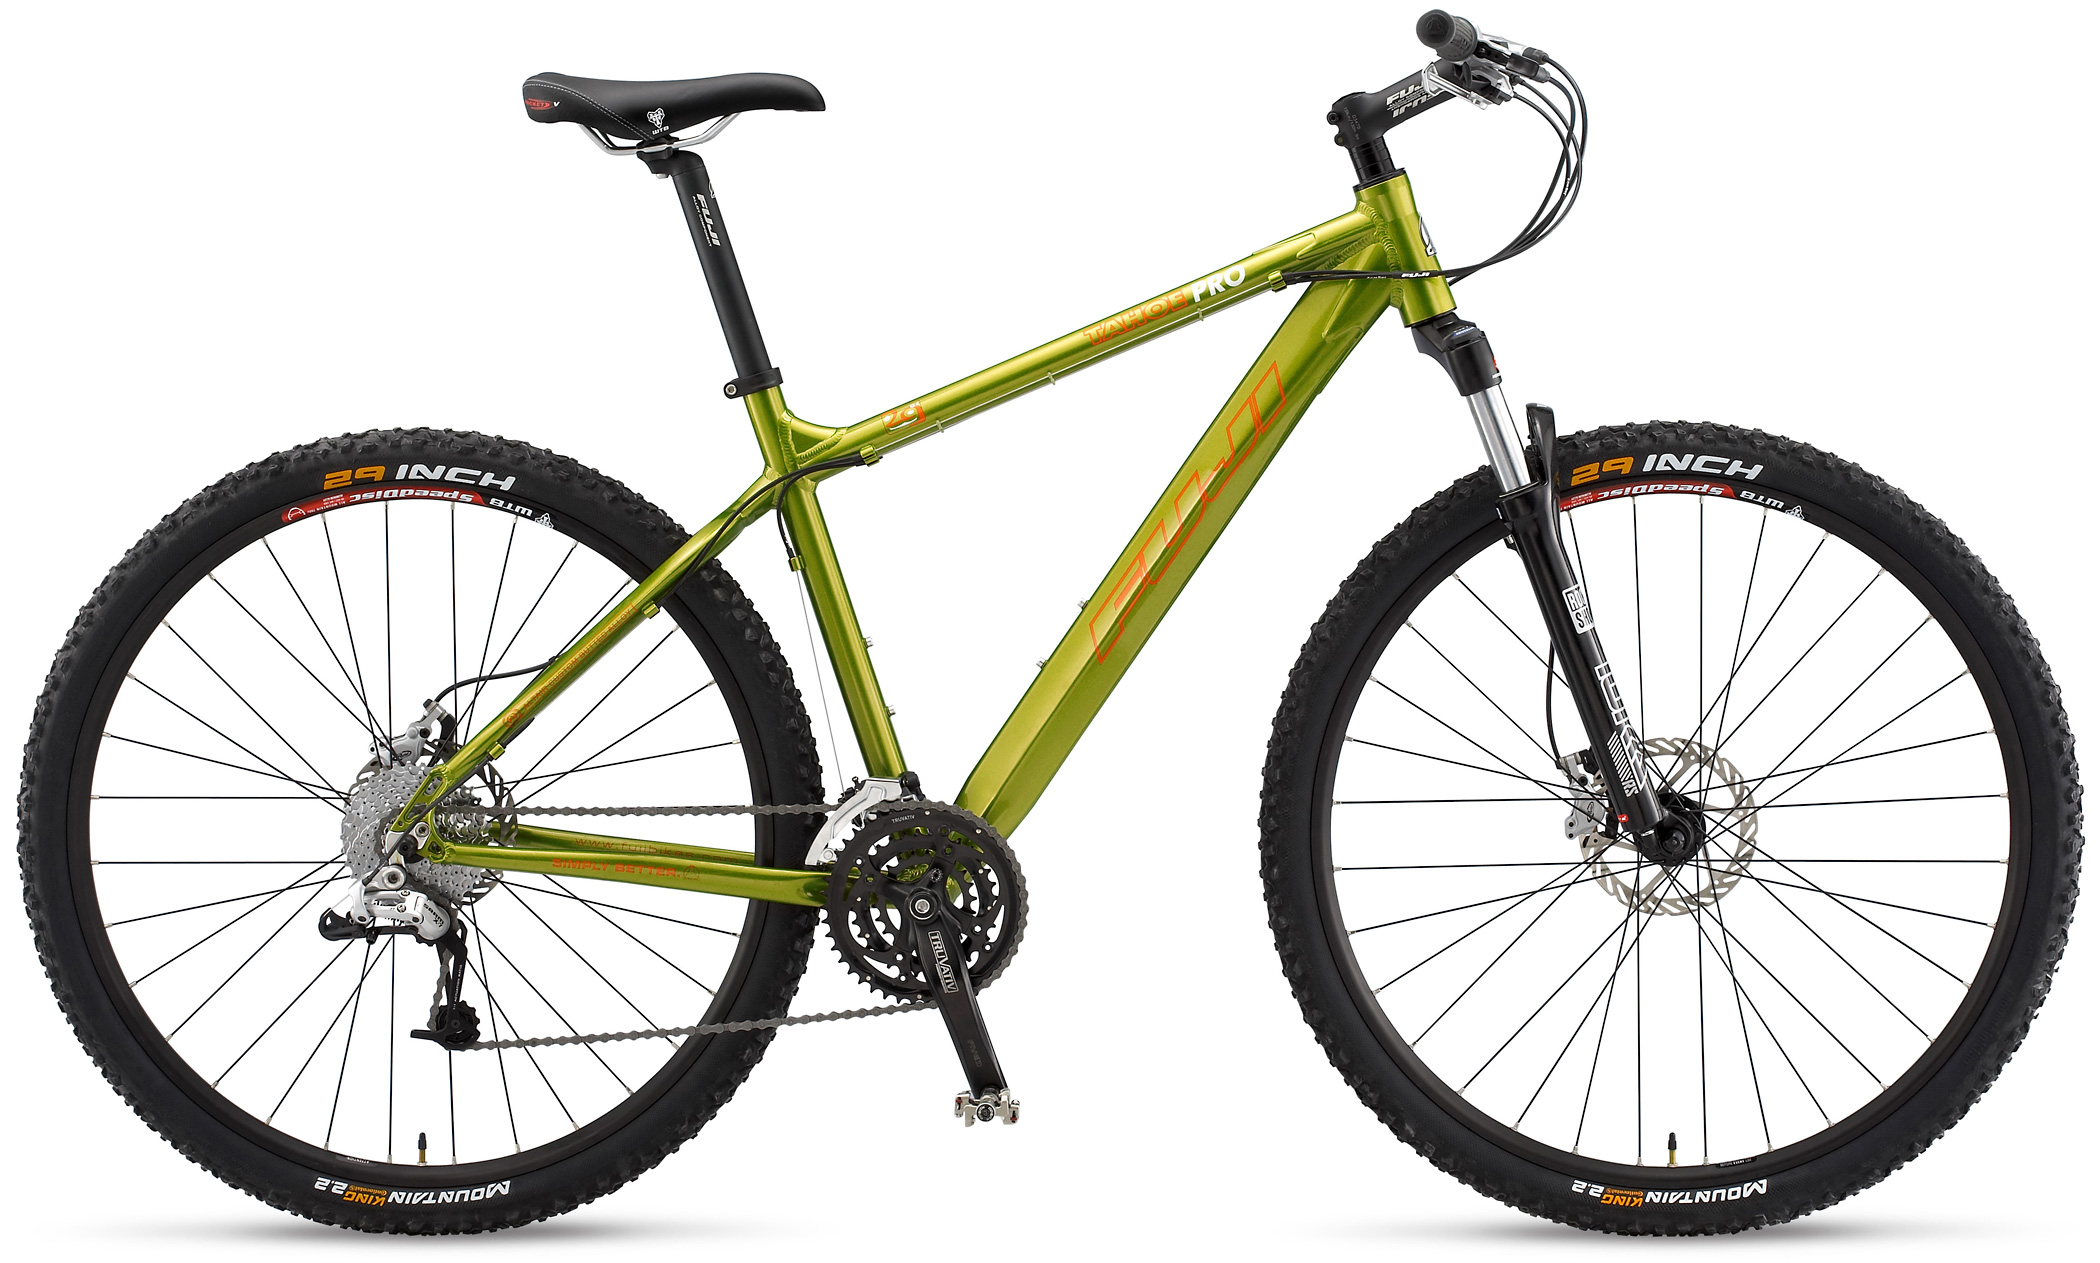 Oxide compromis eindpunt Save up to 60% off Mountain Bikes - MTB - Fuji Tahoe 29 PRO